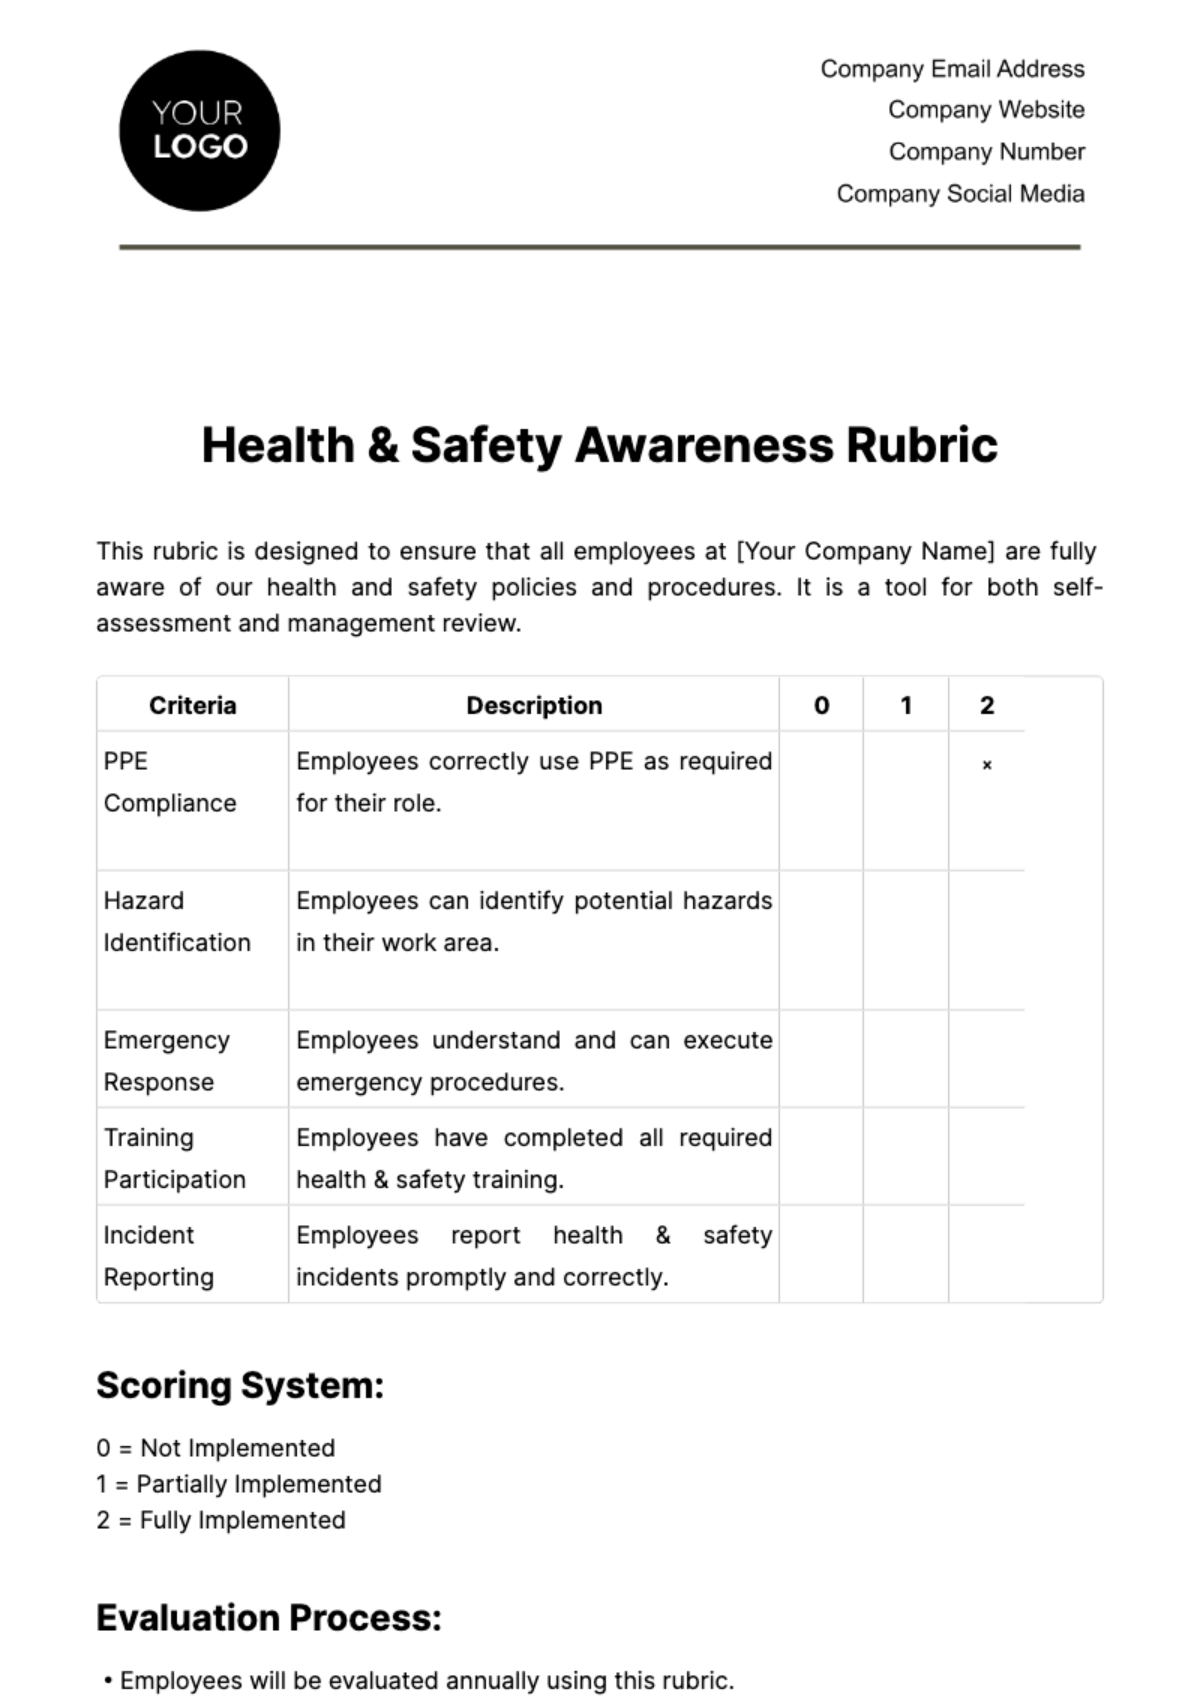 Free Health & Safety Awareness Rubric Template